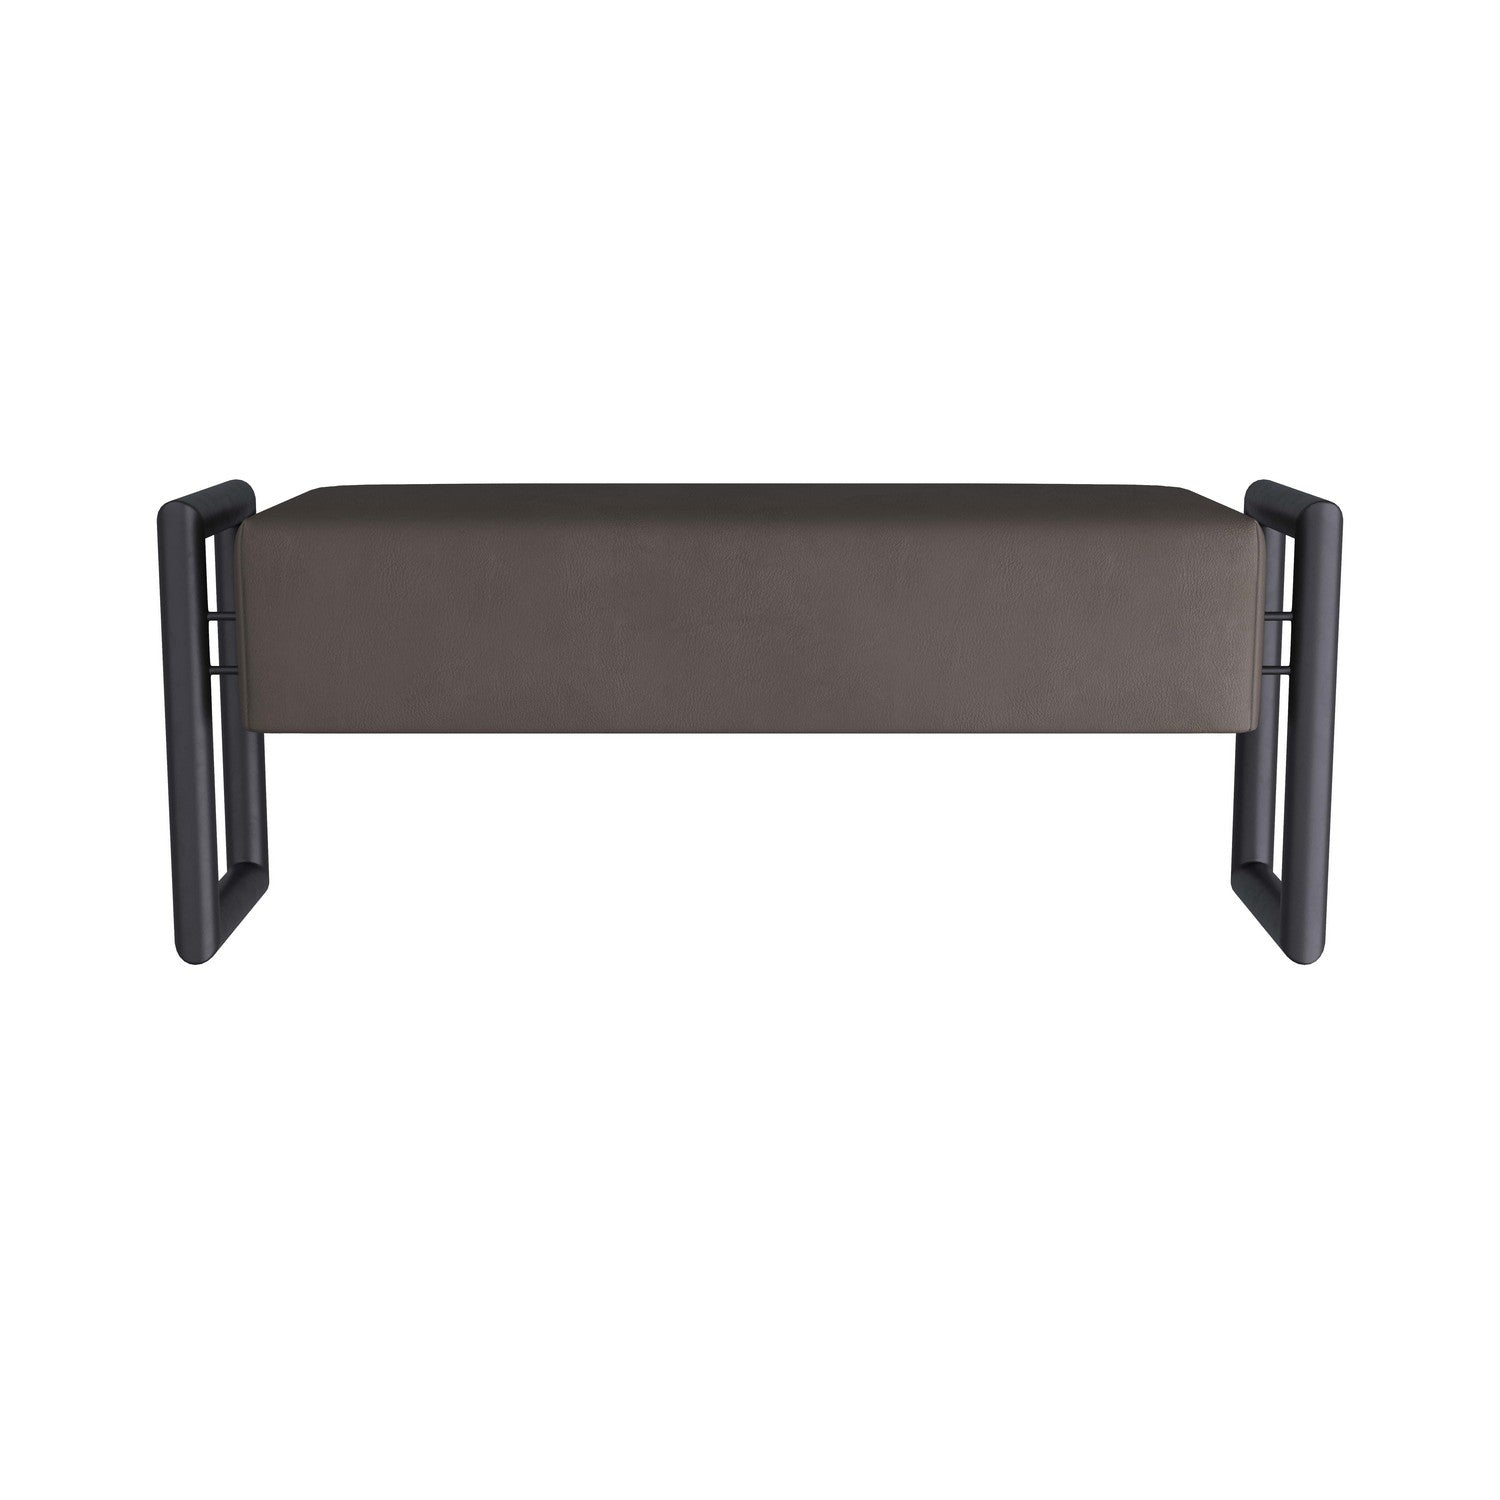 Bench from the Willcox collection in Graphite finish